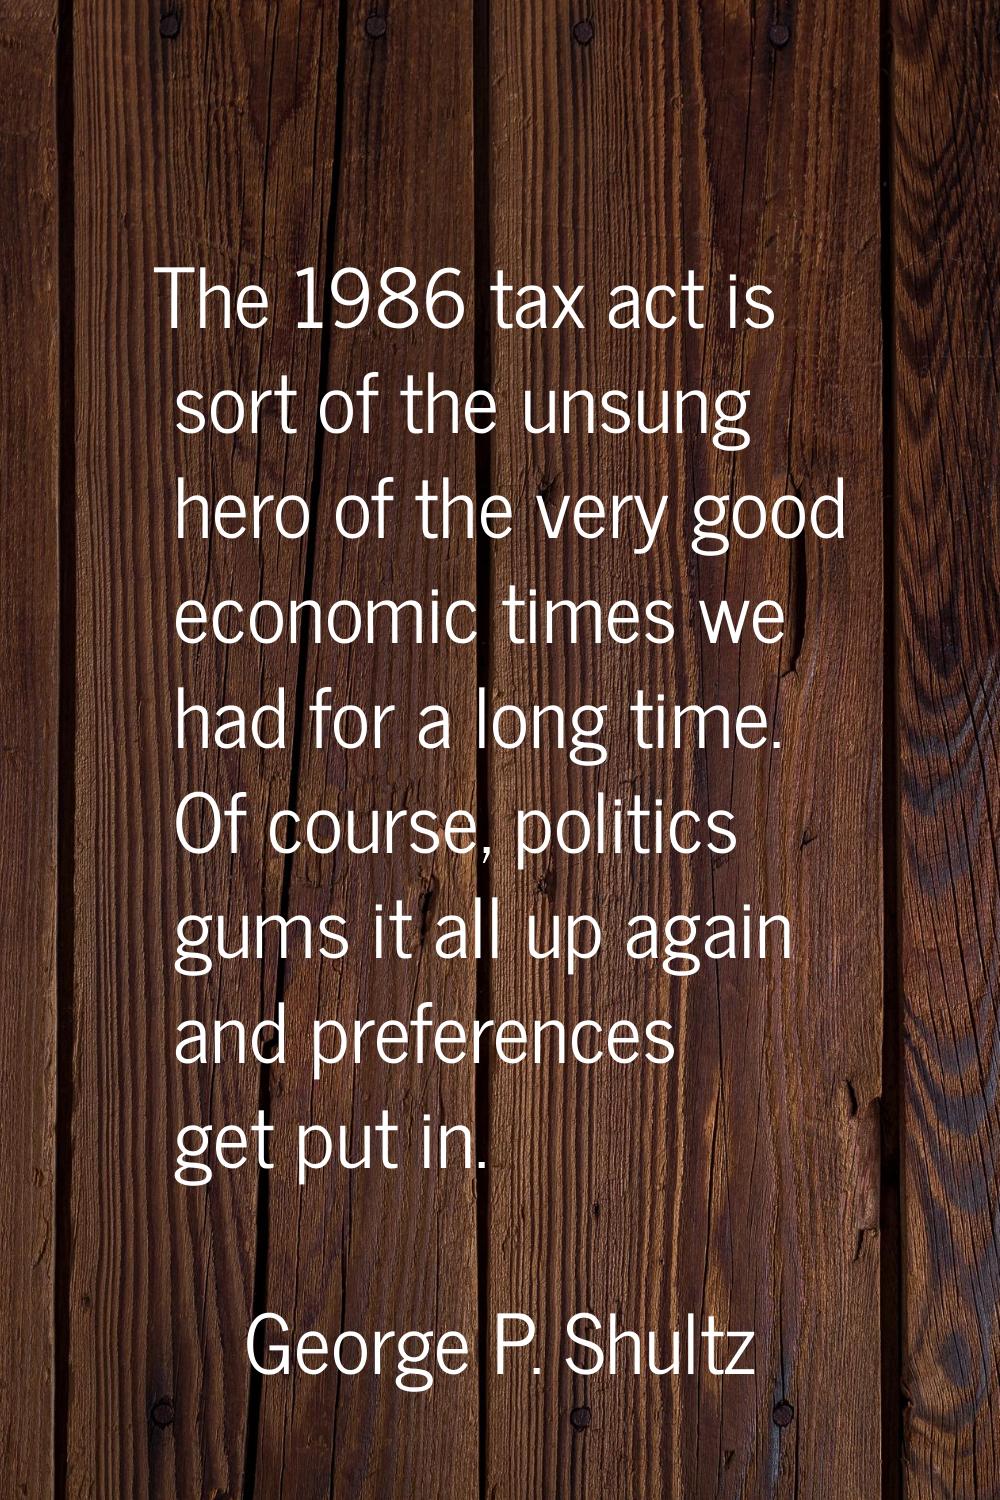 The 1986 tax act is sort of the unsung hero of the very good economic times we had for a long time.